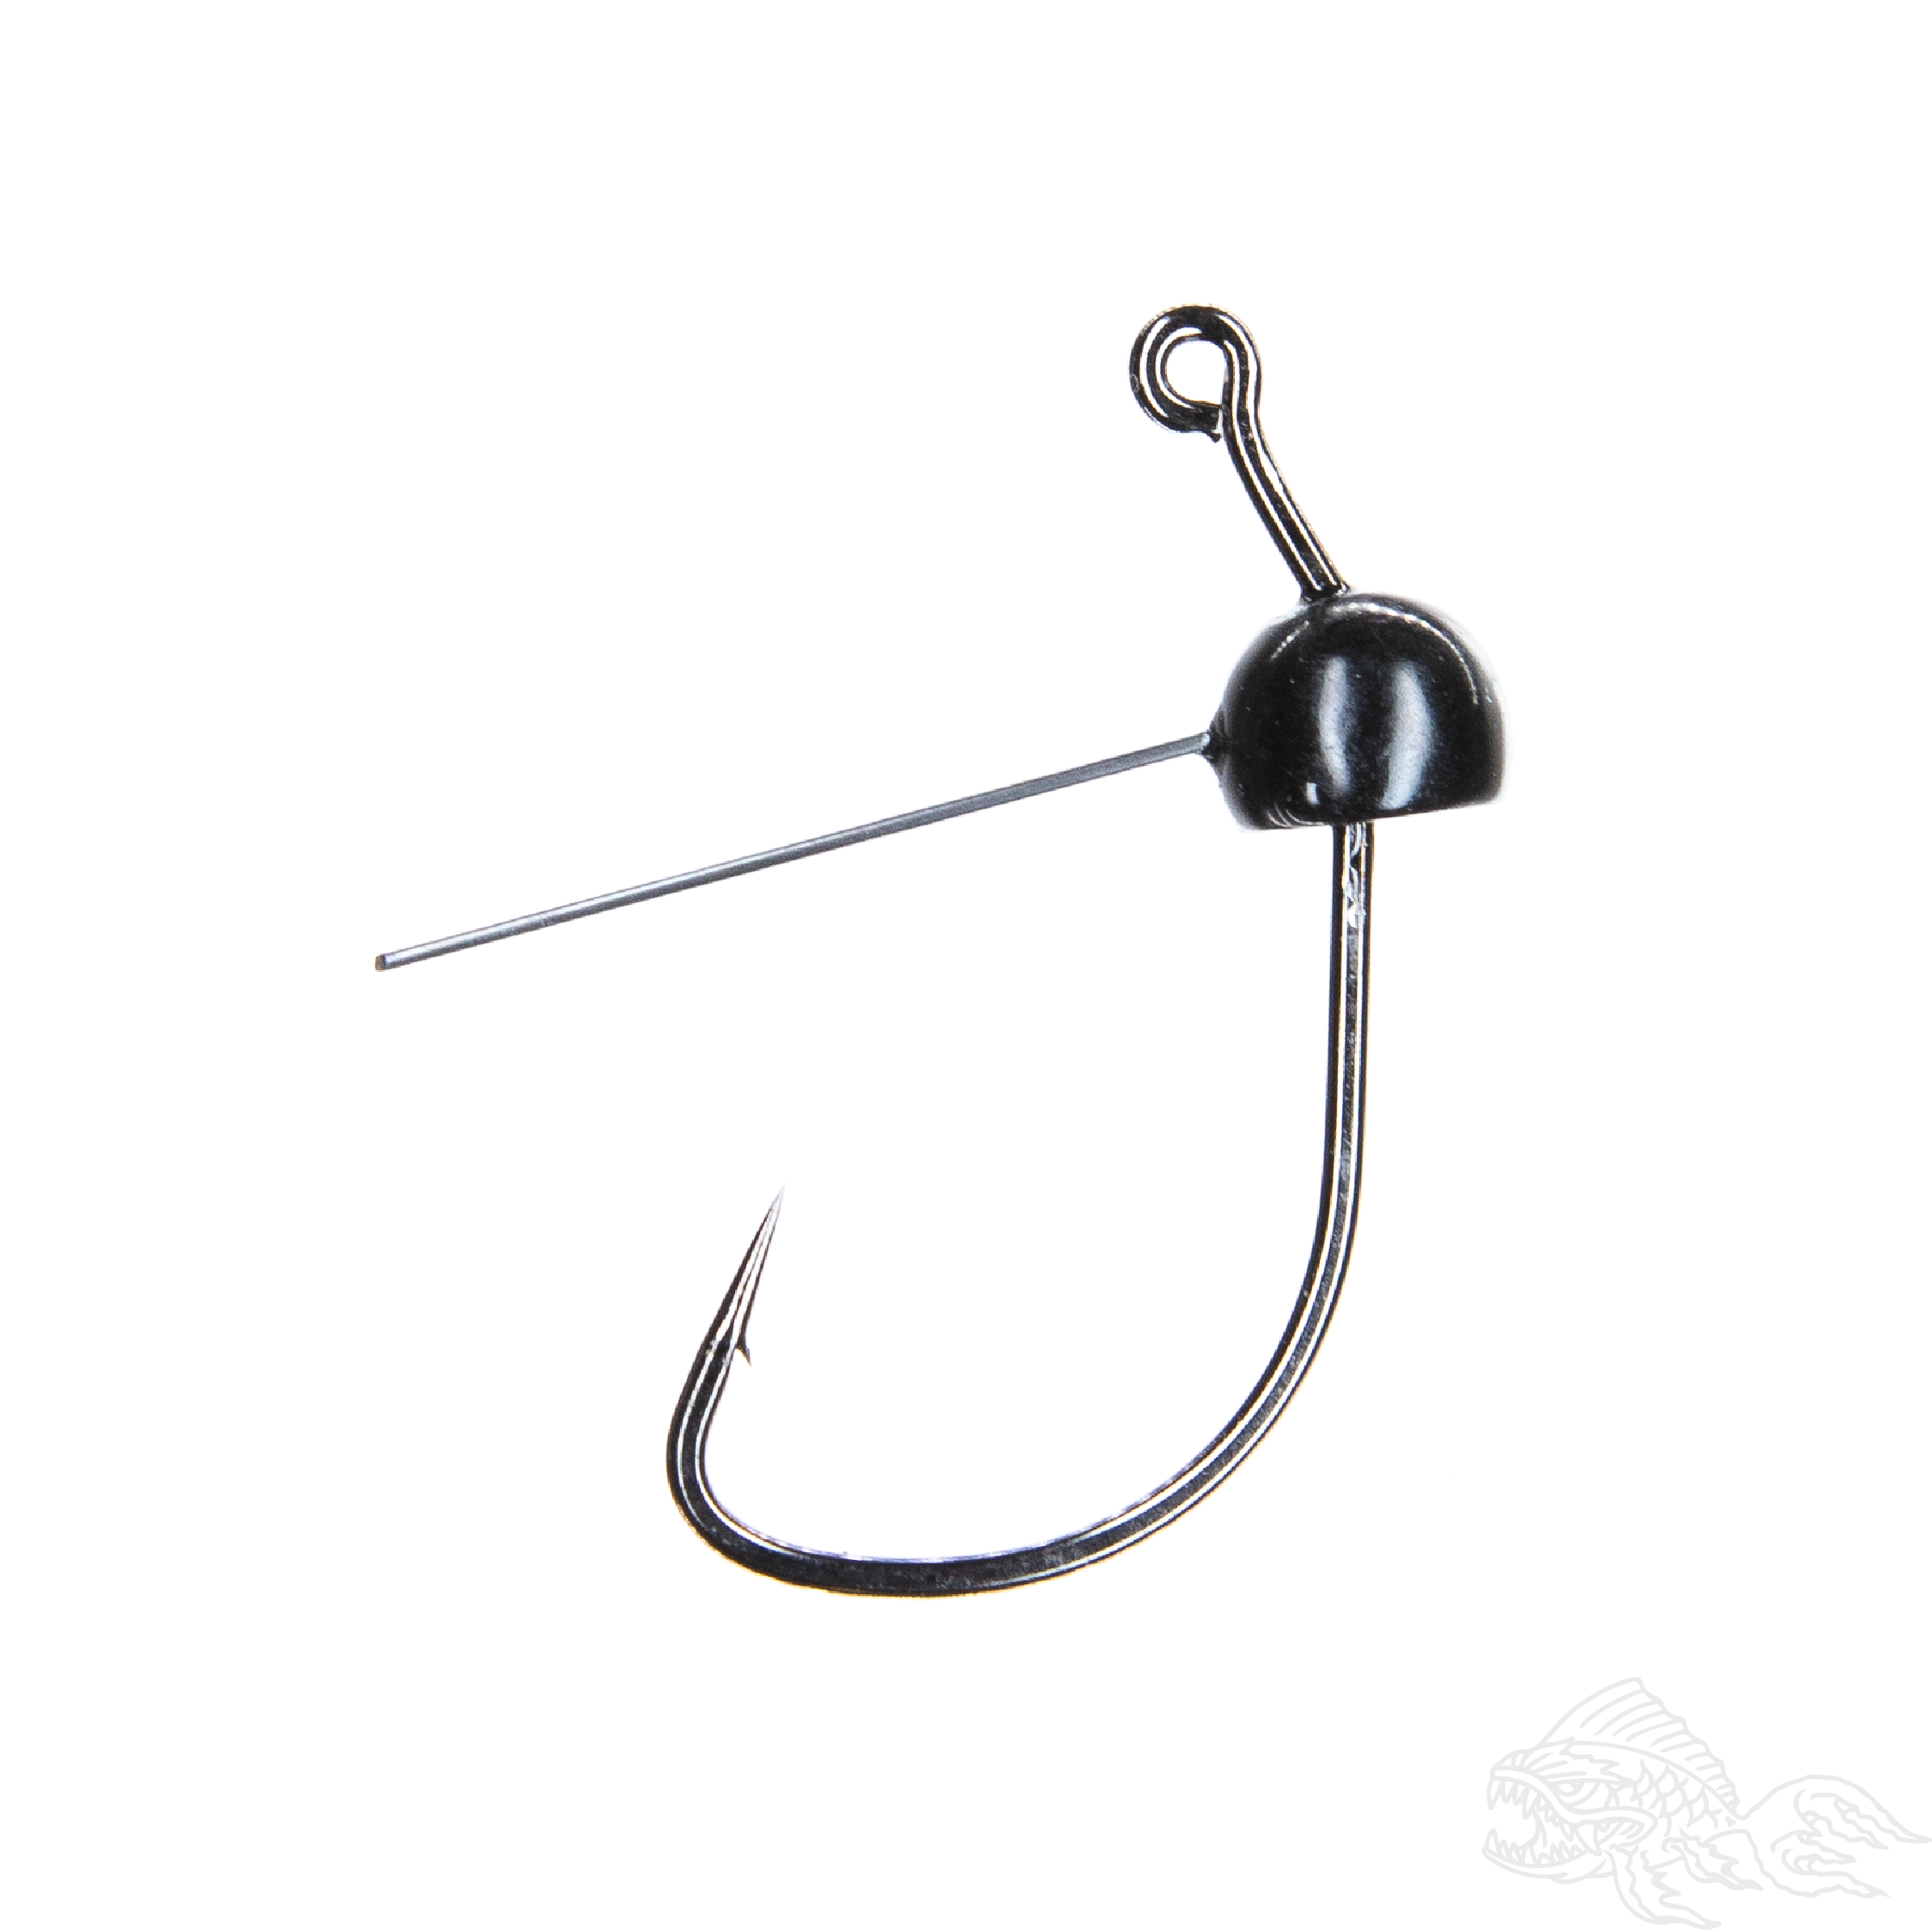 TERMINAL TACKLE – Wicked Weights